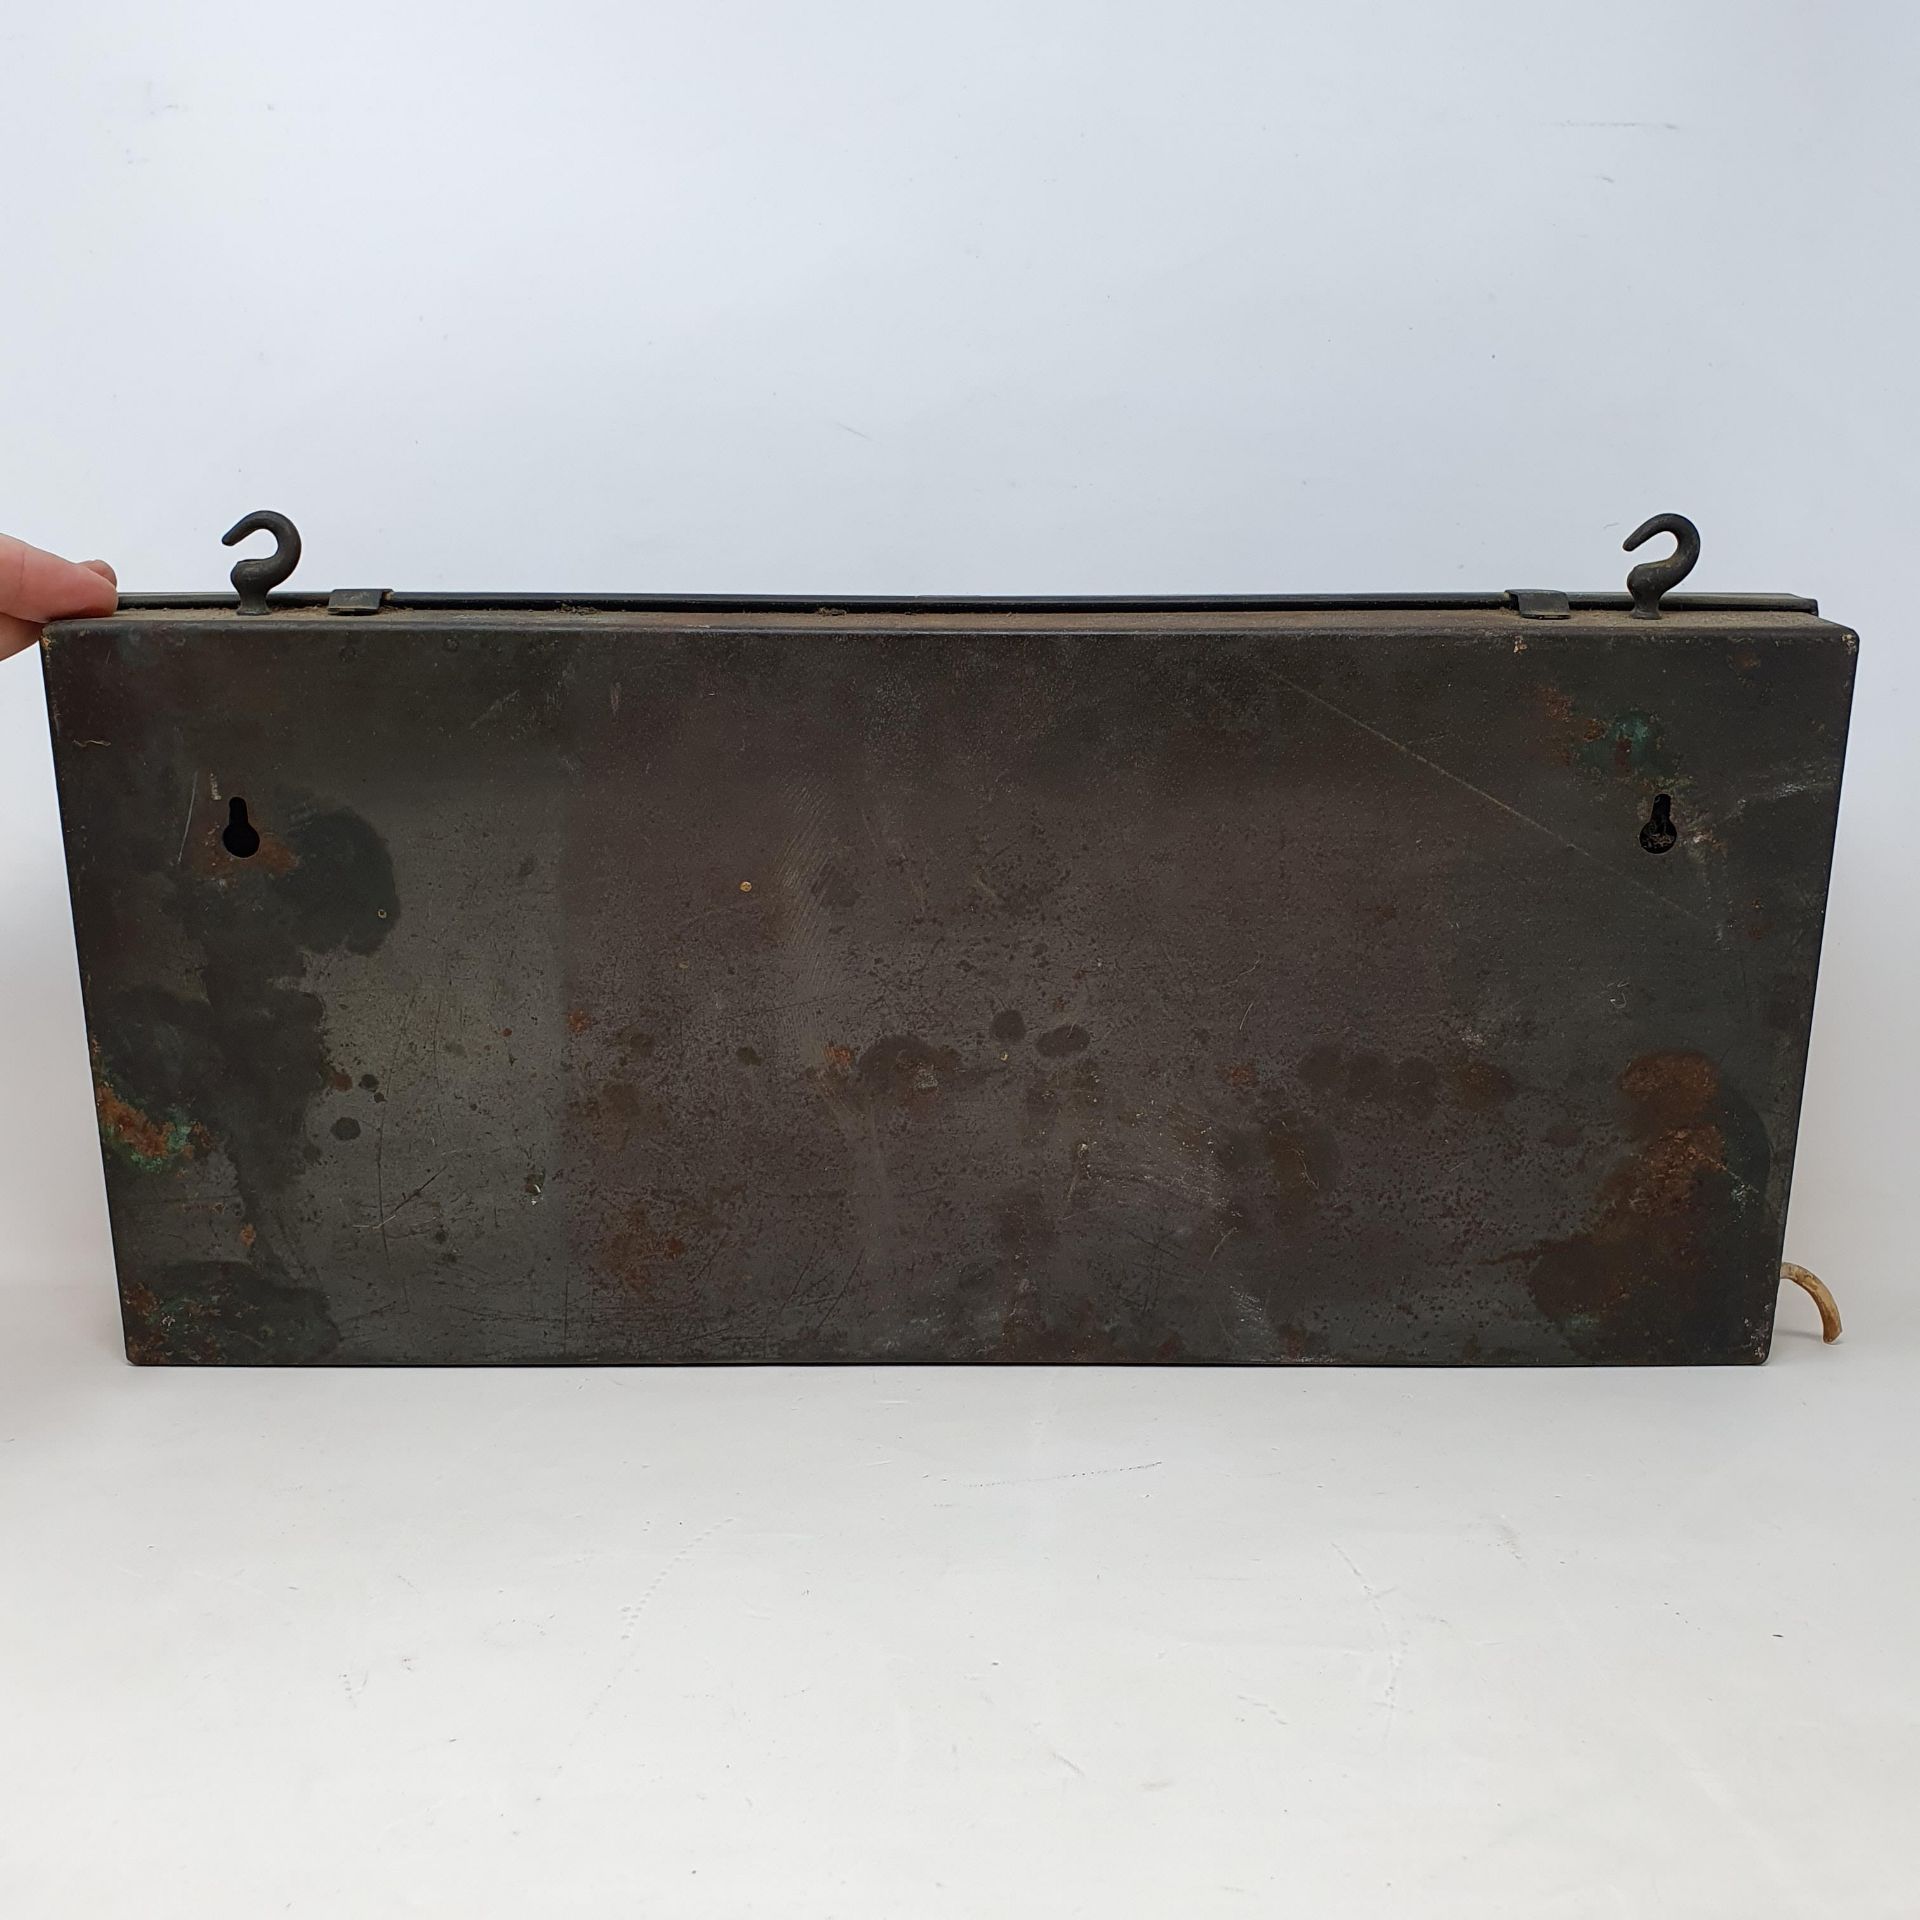 A SIEMENS ELECTRIC LAMPS showroom light type box, in an anodised copper case, probably 1920's with - Image 3 of 3